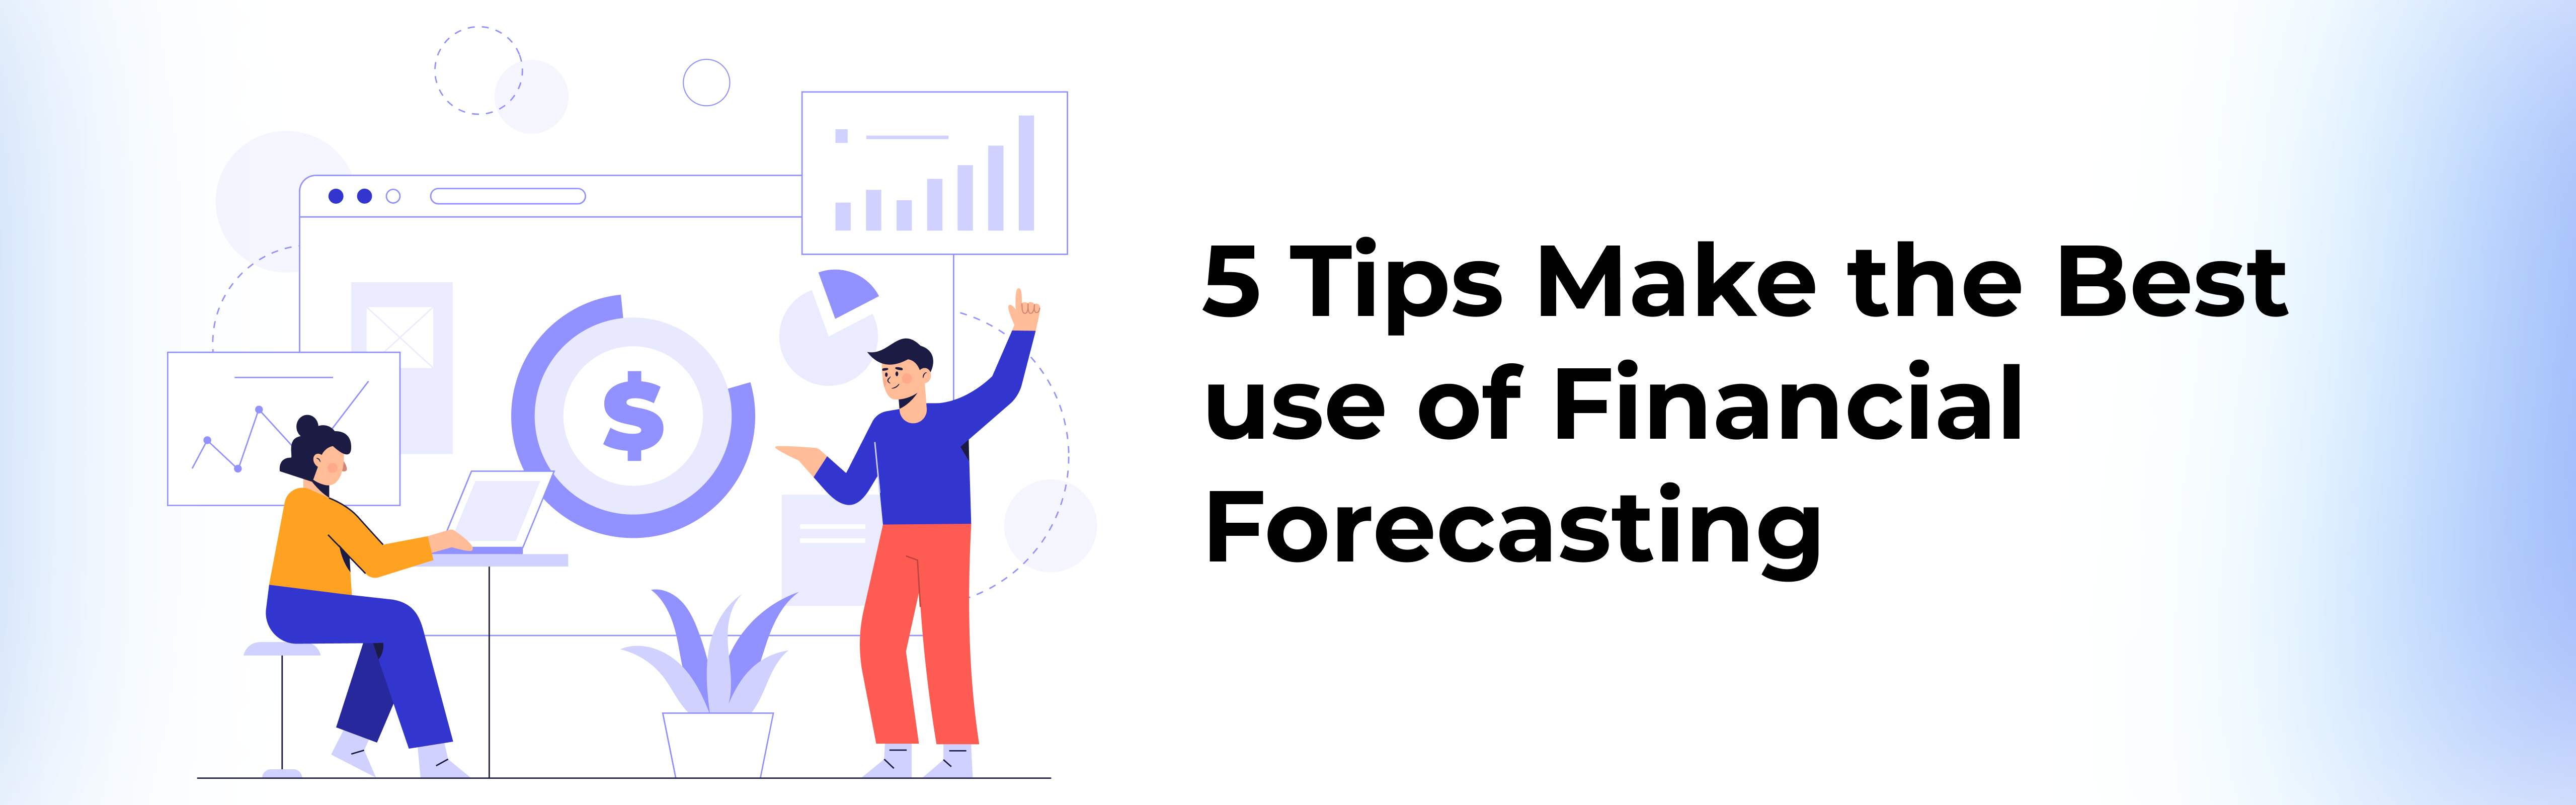 tips-on-how-to-make-the-best-use-of-financial-forecasting-to-ensure-success-of-your-business